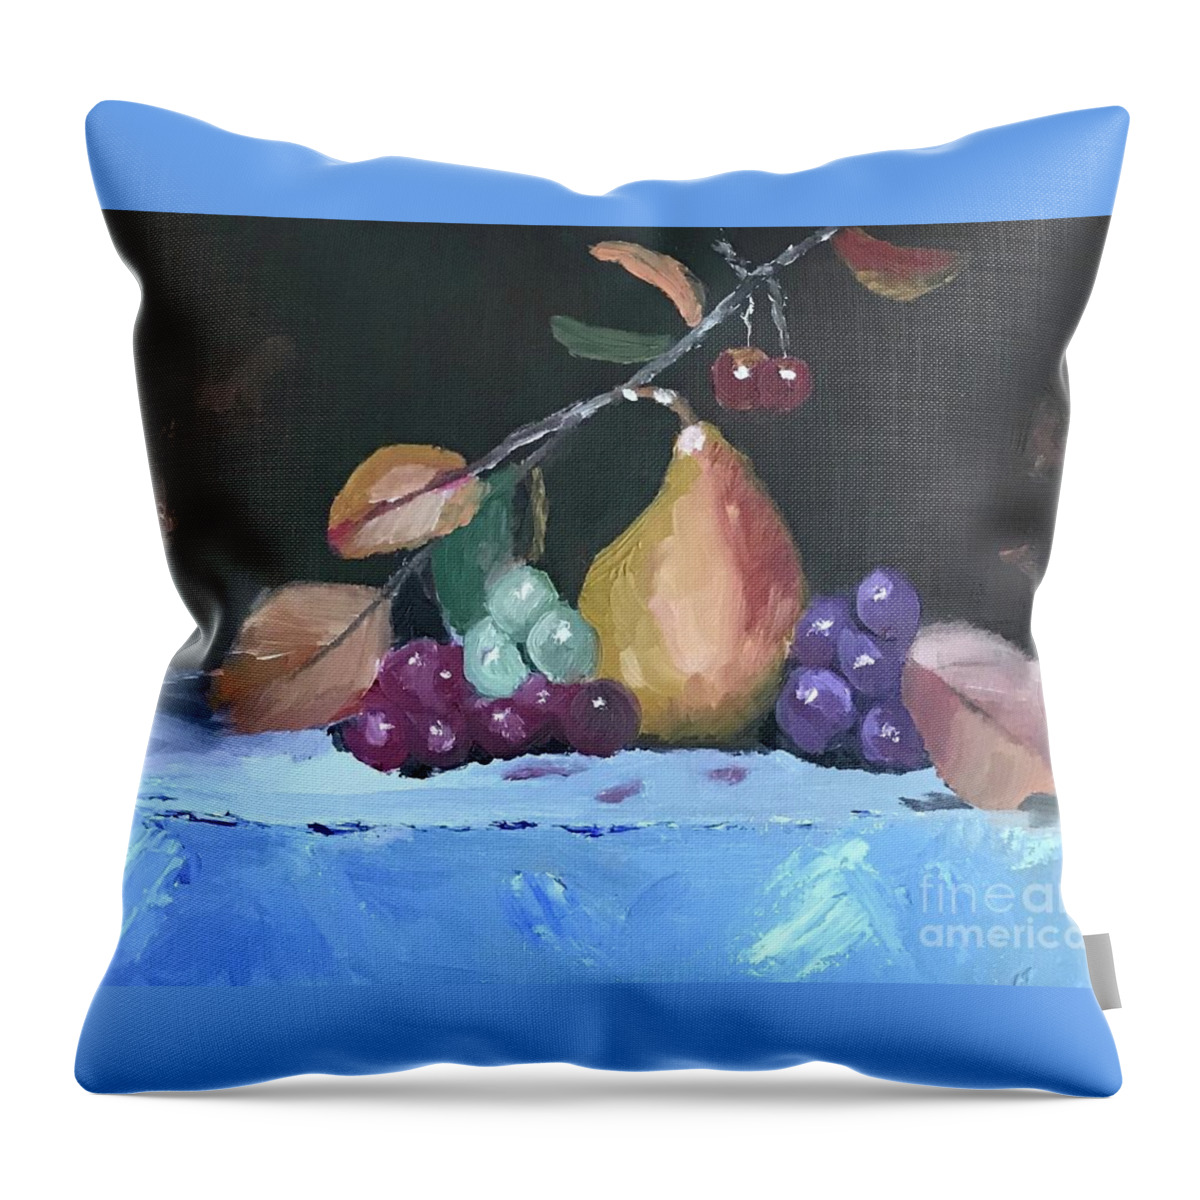 Original Art Work Throw Pillow featuring the painting Still Life #2 by Theresa Honeycheck